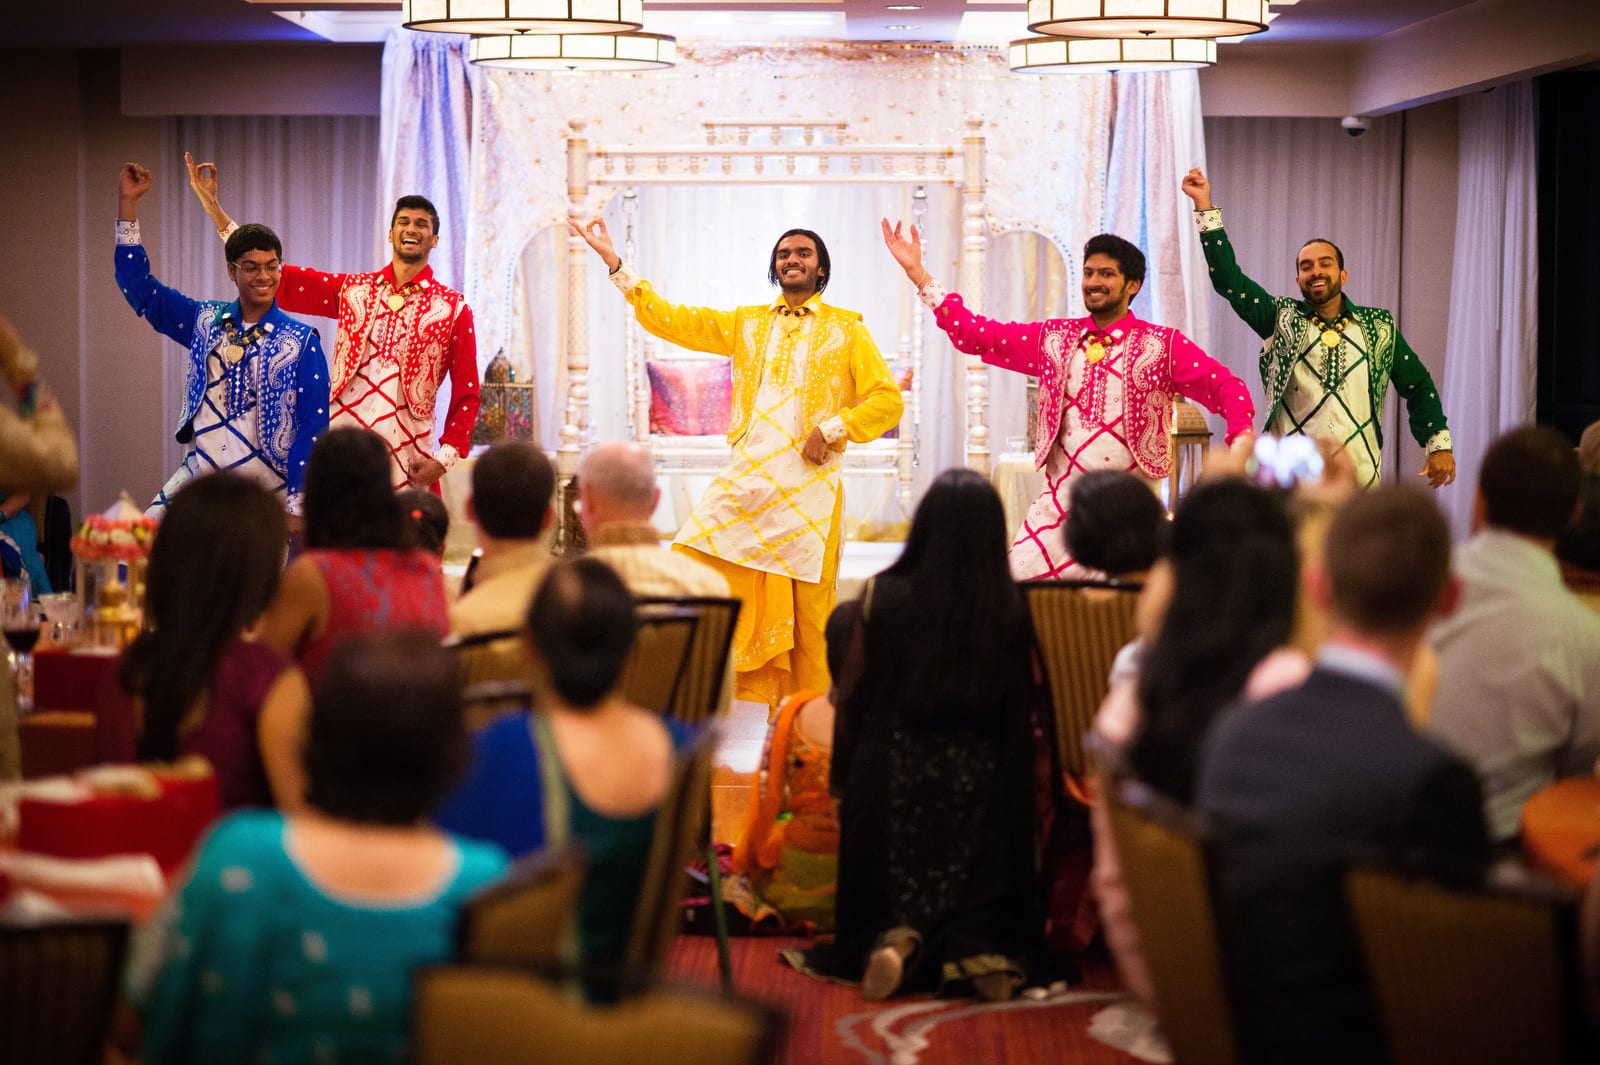 Four men wearing brightly colored clothes dance in front of guests during a Renaissance Phipps South Asian Wedding.